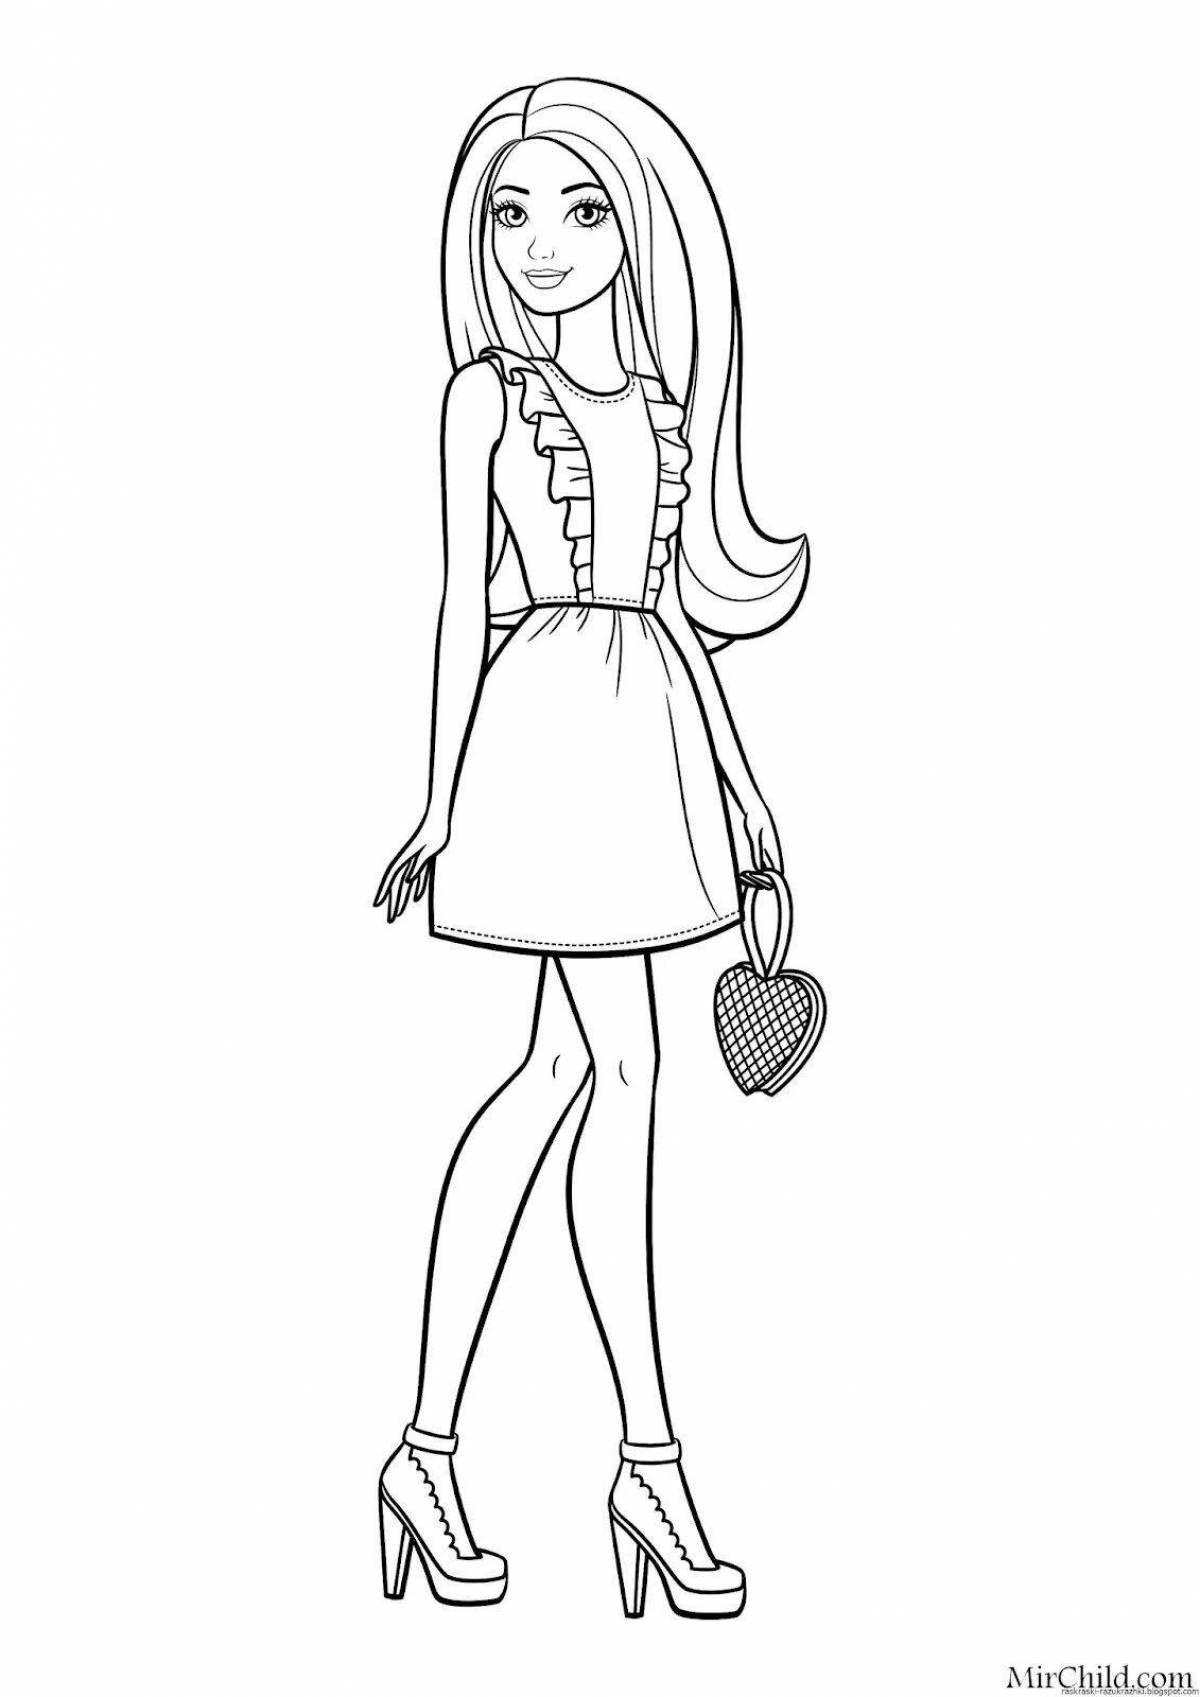 A fascinating coloring book of a modern girl in full growth